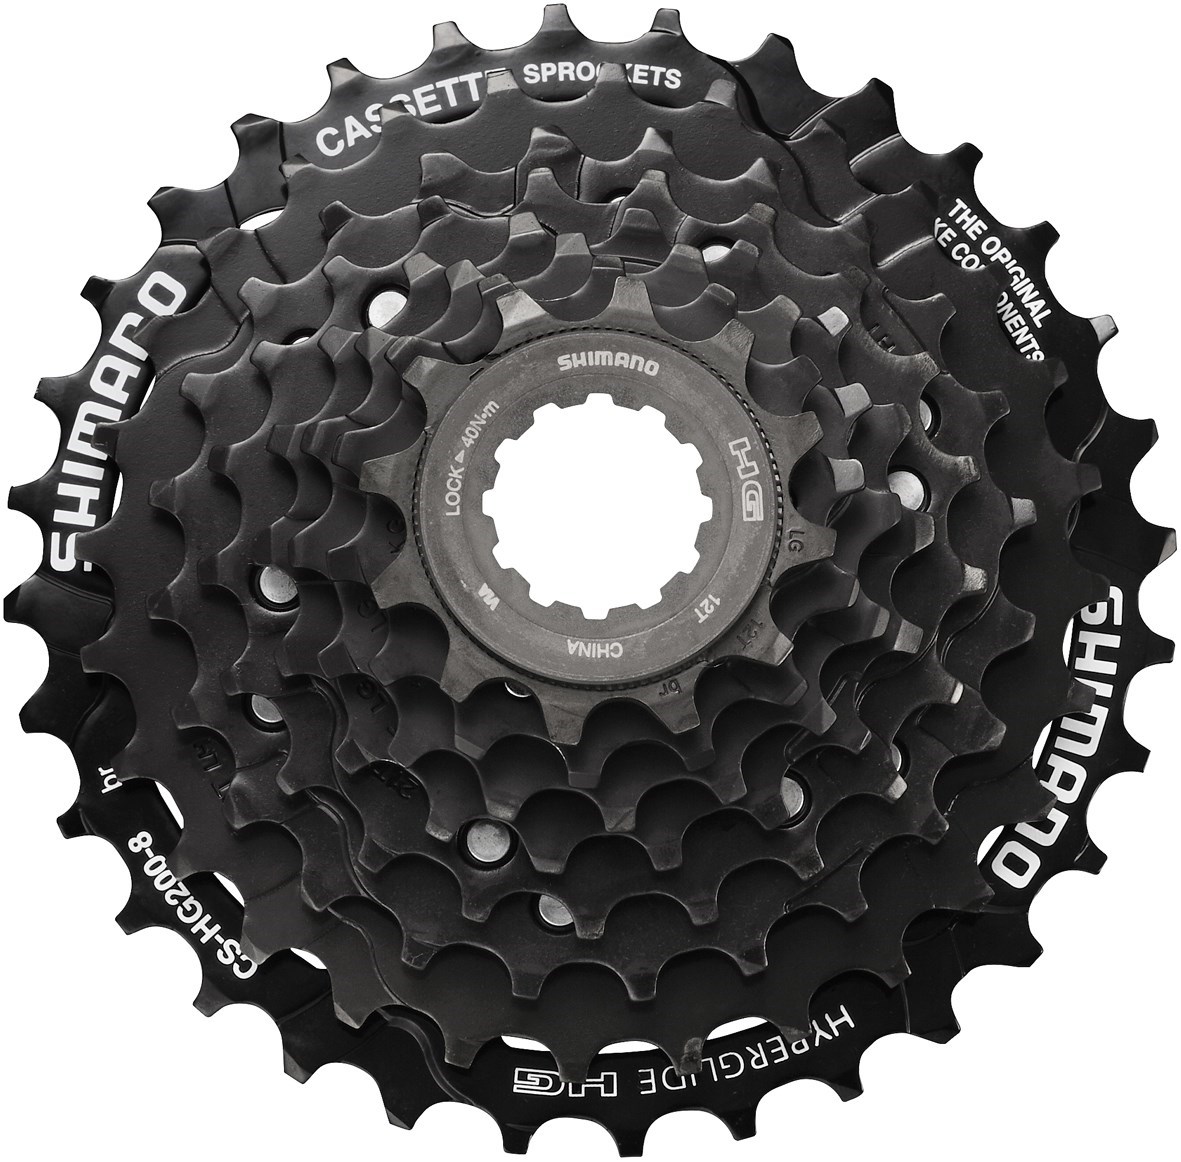 Shimano CS-HG200 TX 8-speed cassette product image